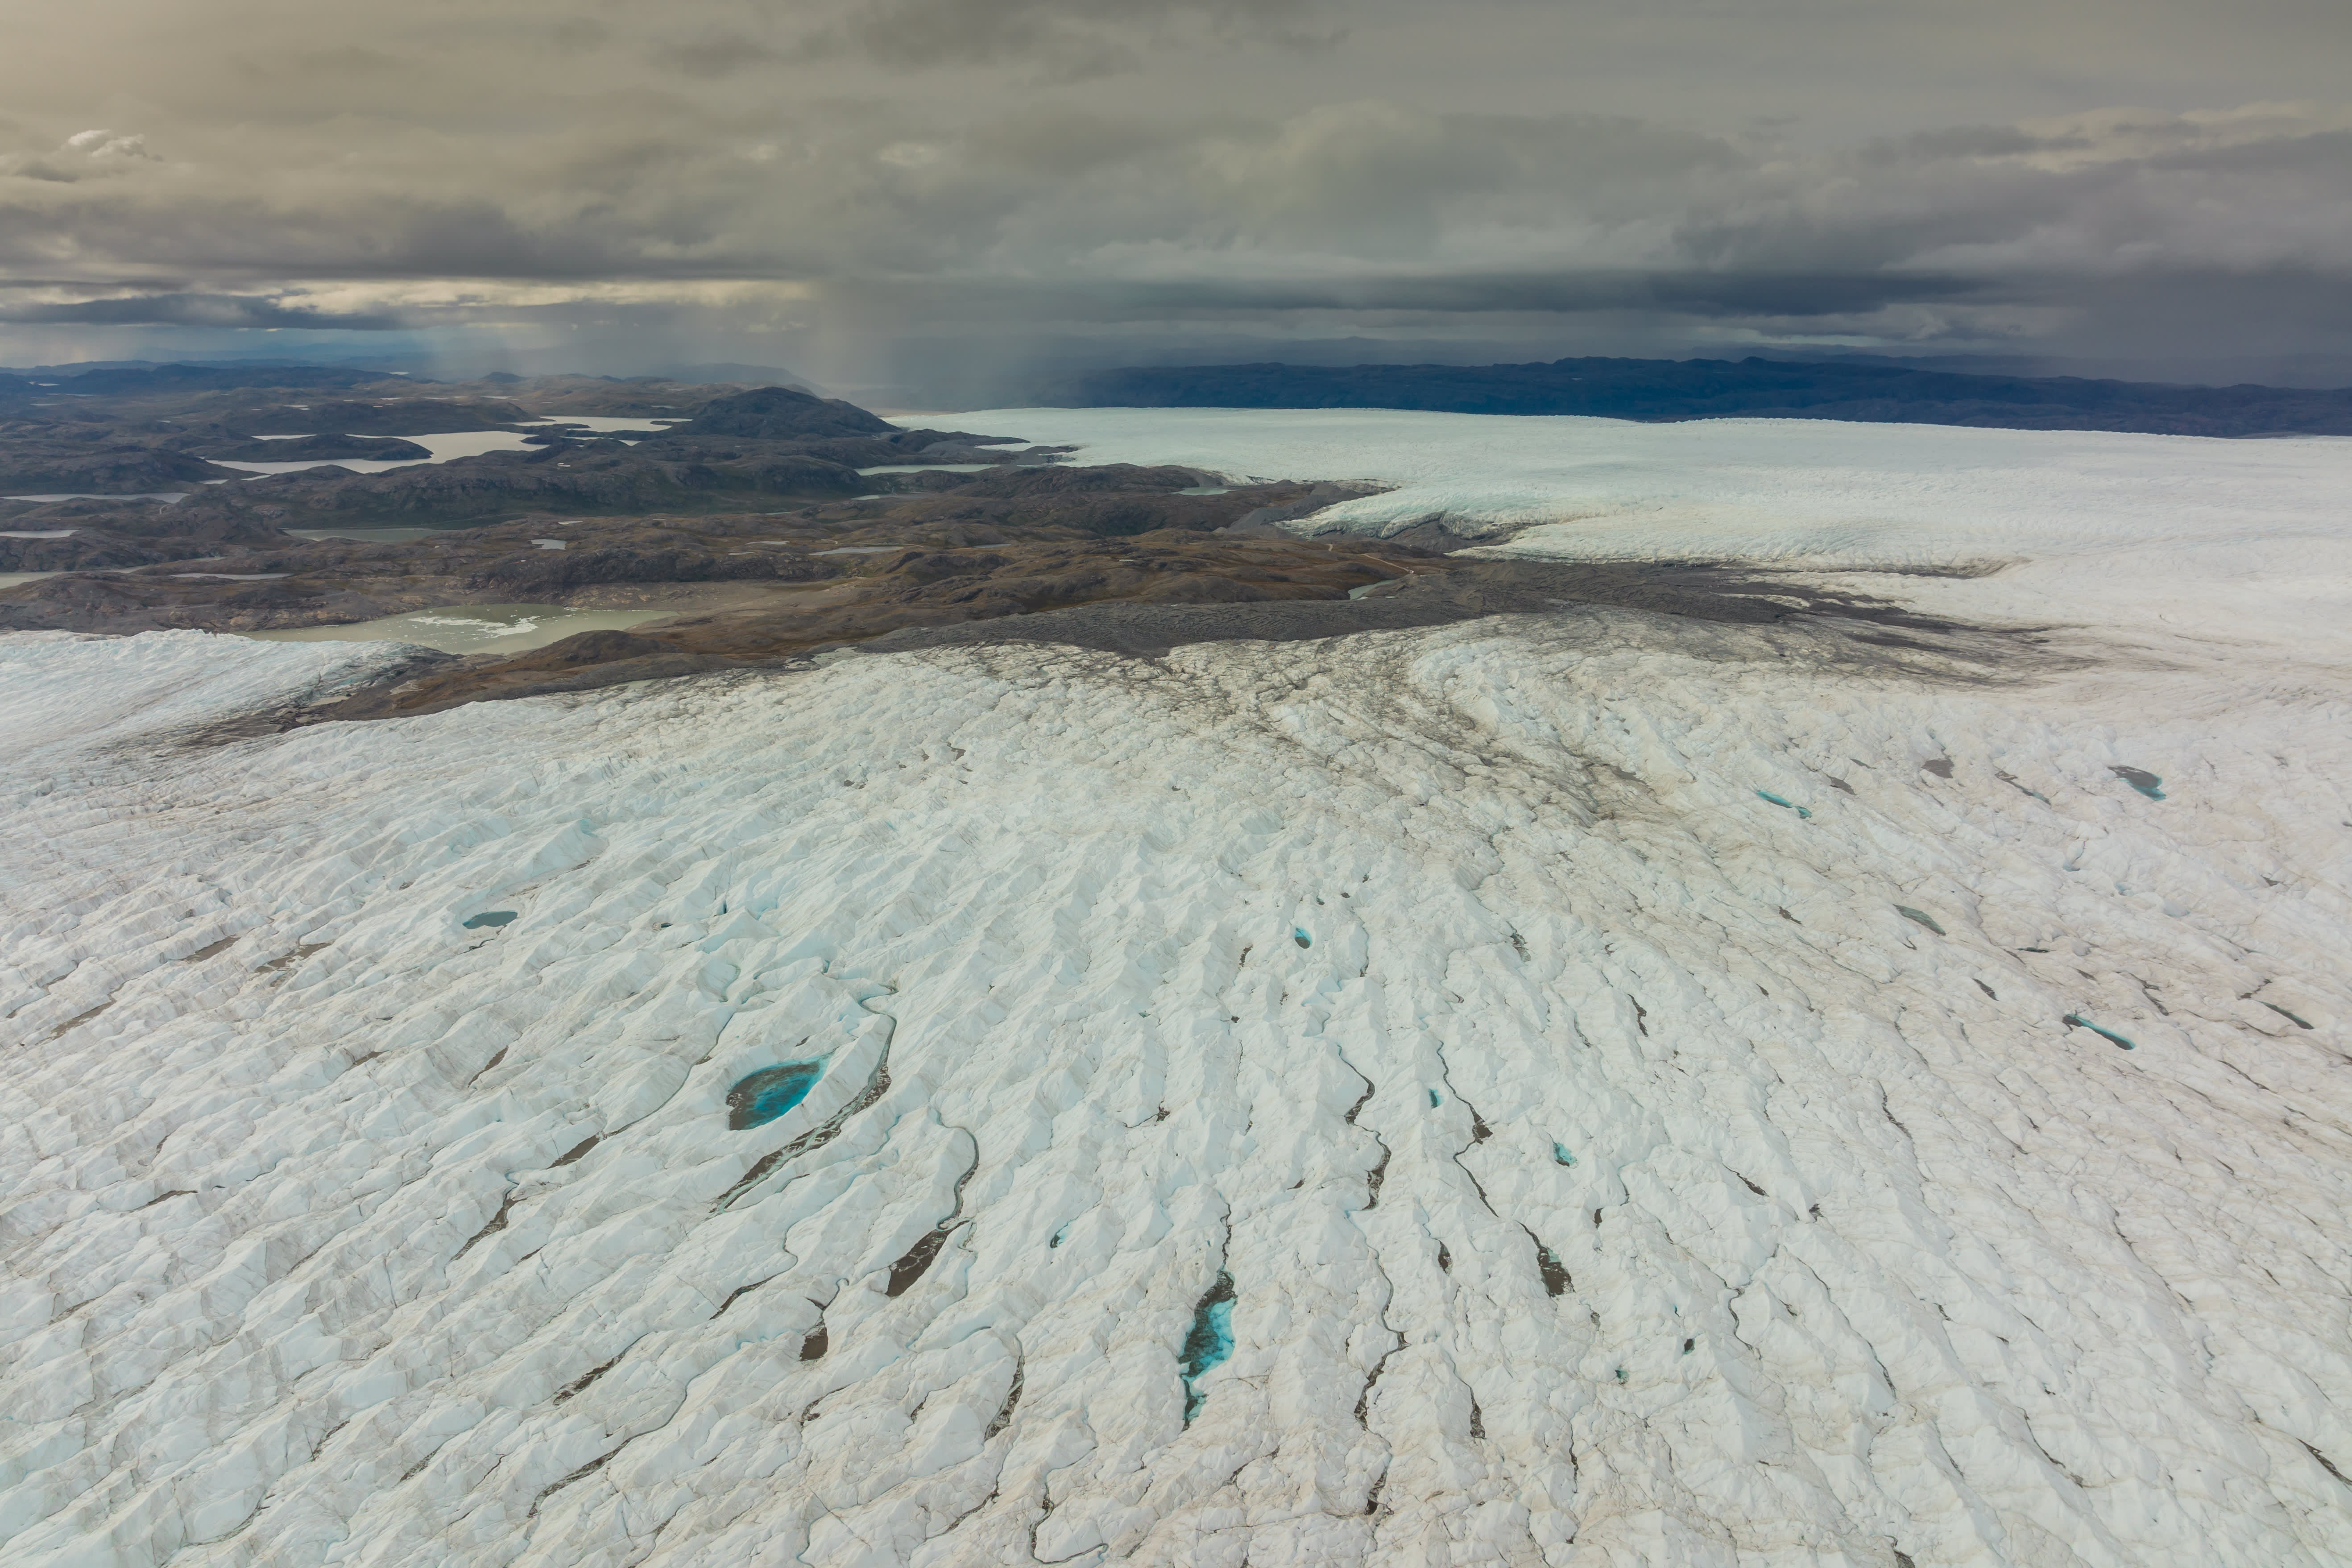 We are halfway to the tipping point for the melting of the Greenland Ice Sheet